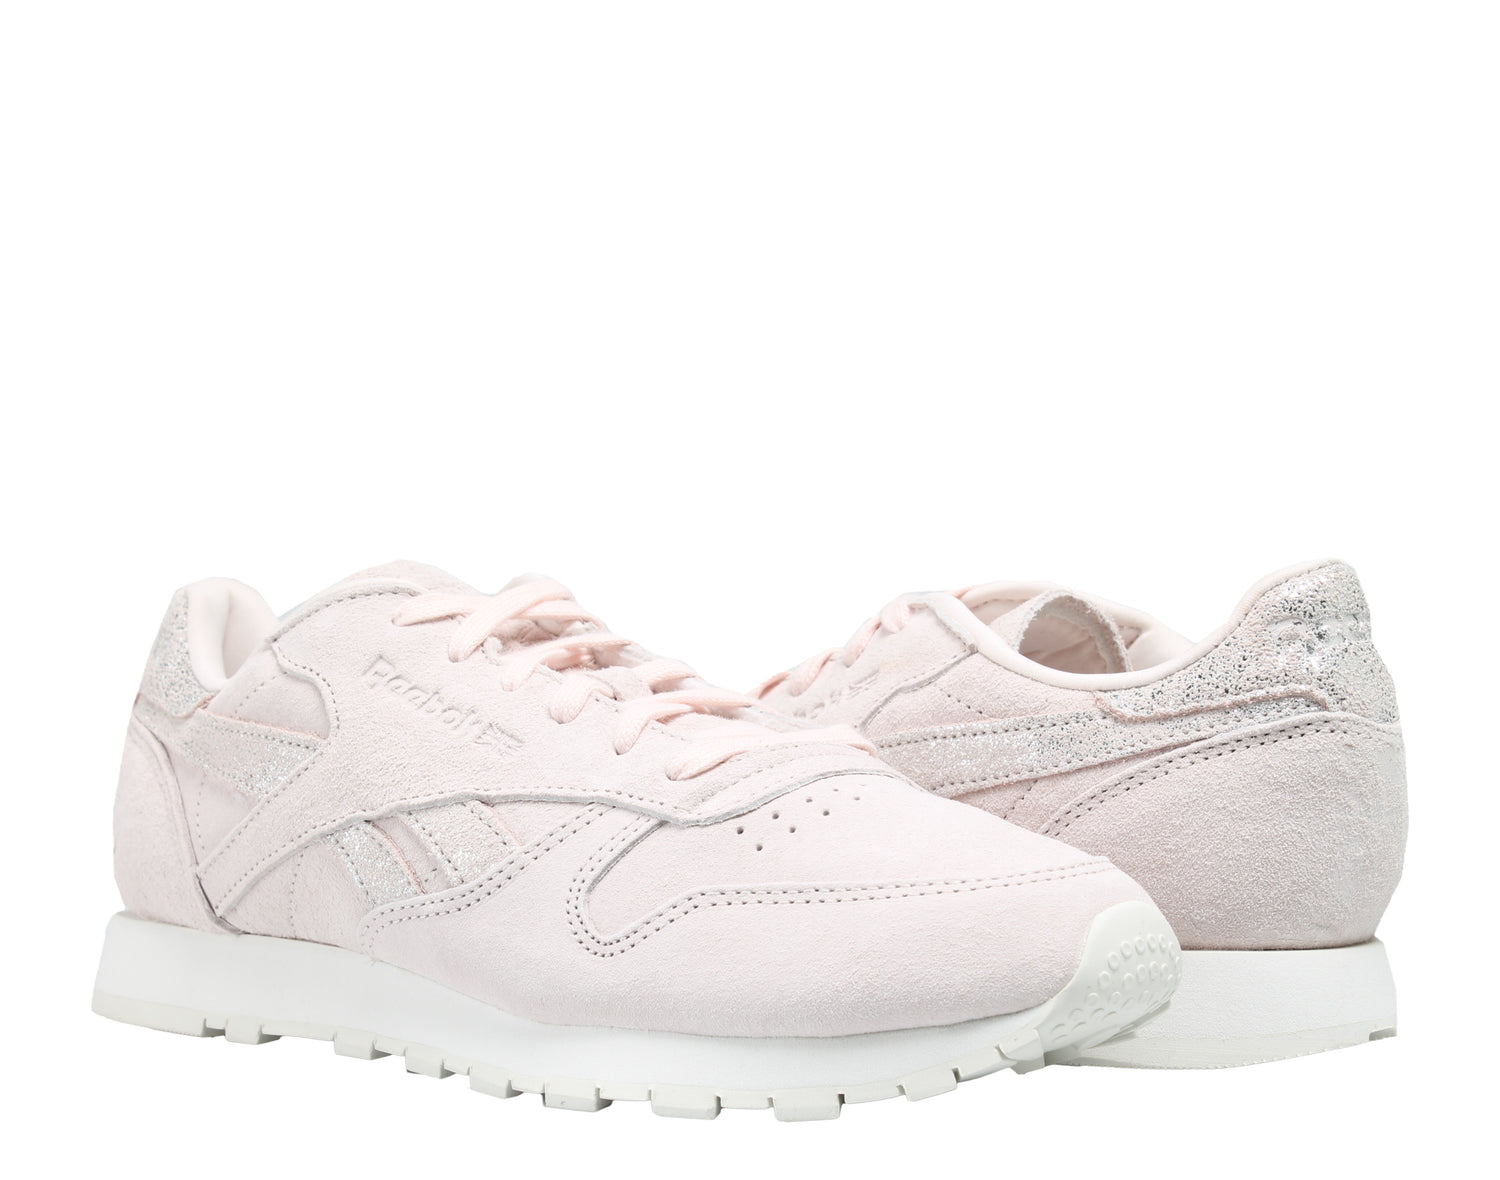 Reebok Classic Leather Shimmer Women's Running Shoes